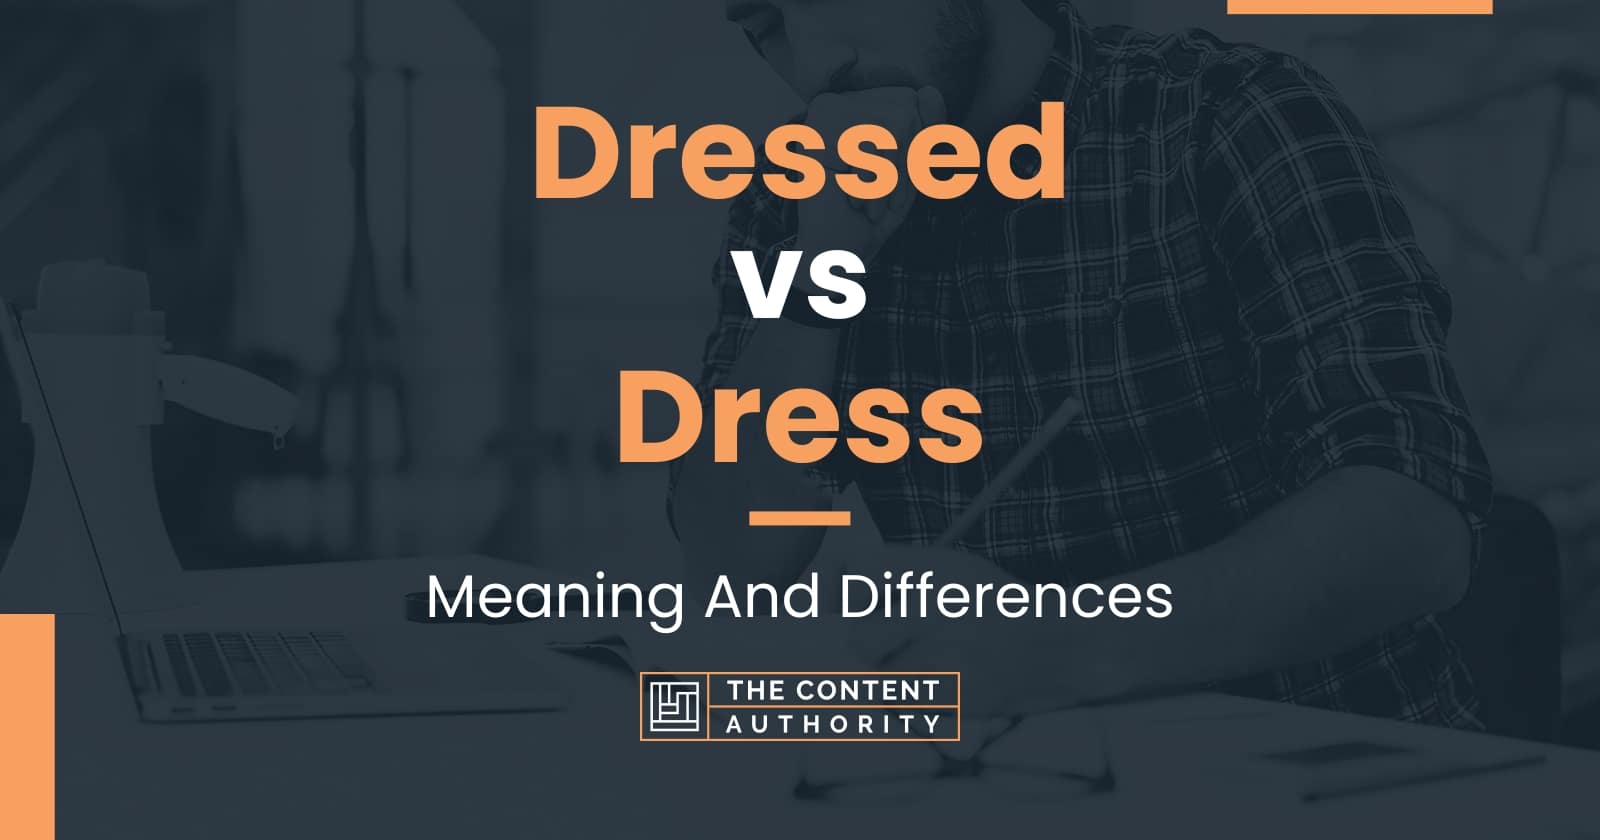 Dressed vs Dress: Meaning And Differences